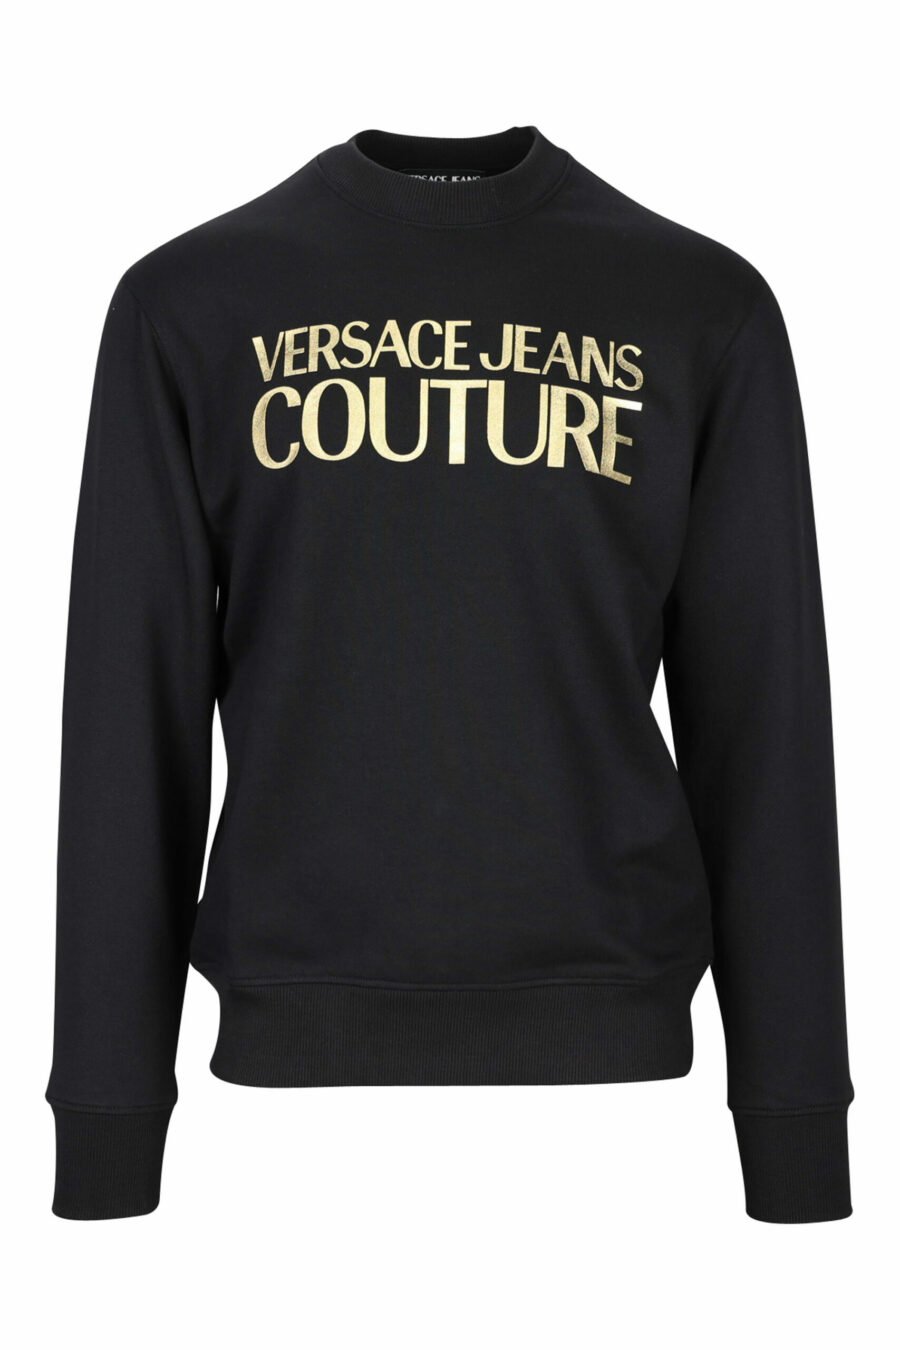 Black sweatshirt with classic maxilogue in shiny gold - 8052019456998 scaled